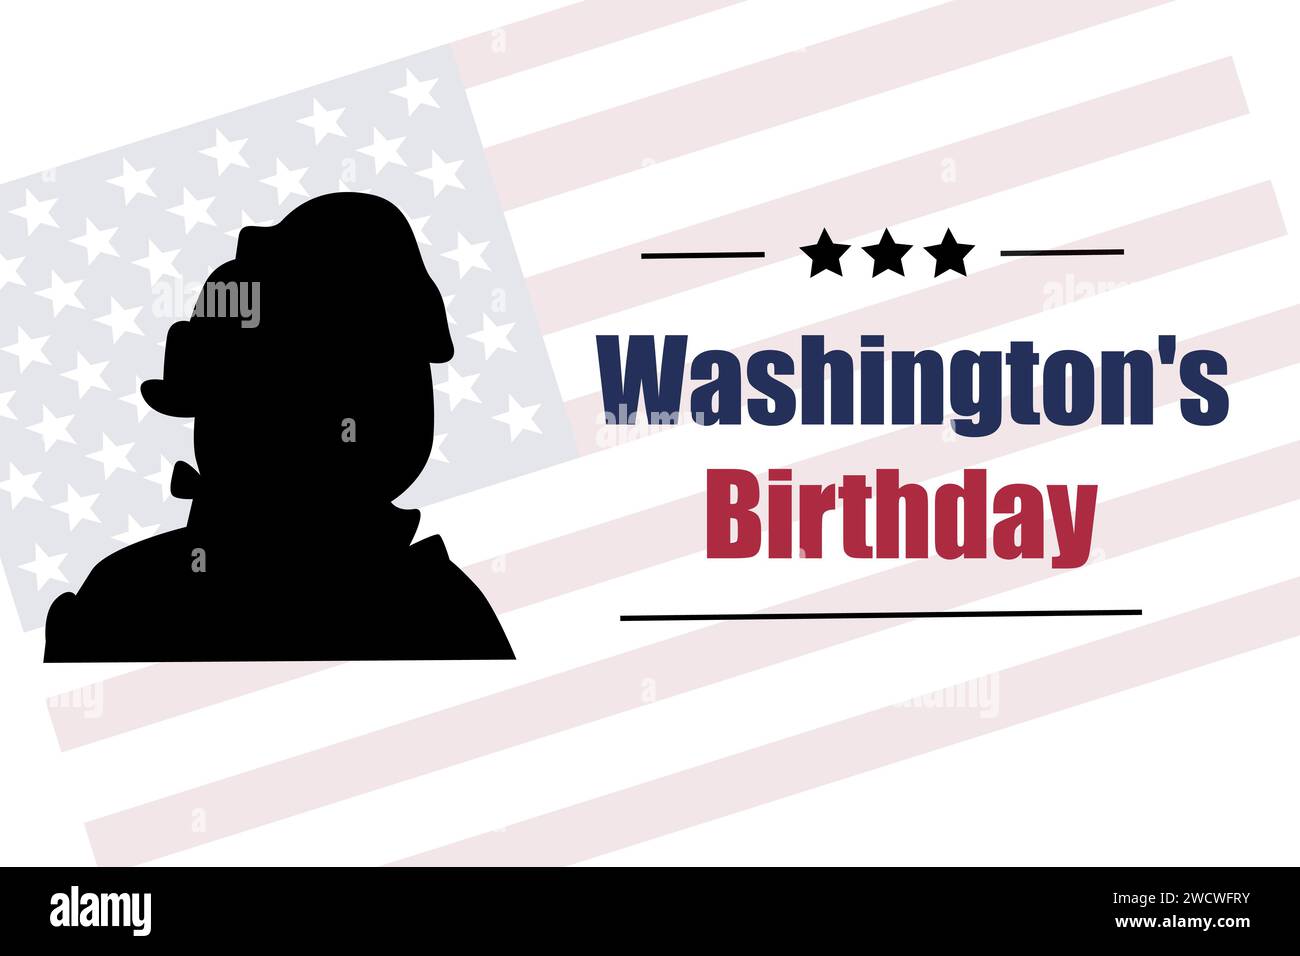 Hand drawn sketch banner of george washington silhouette. Vector illustration isolated. Minimalistic design.  Stock Vector